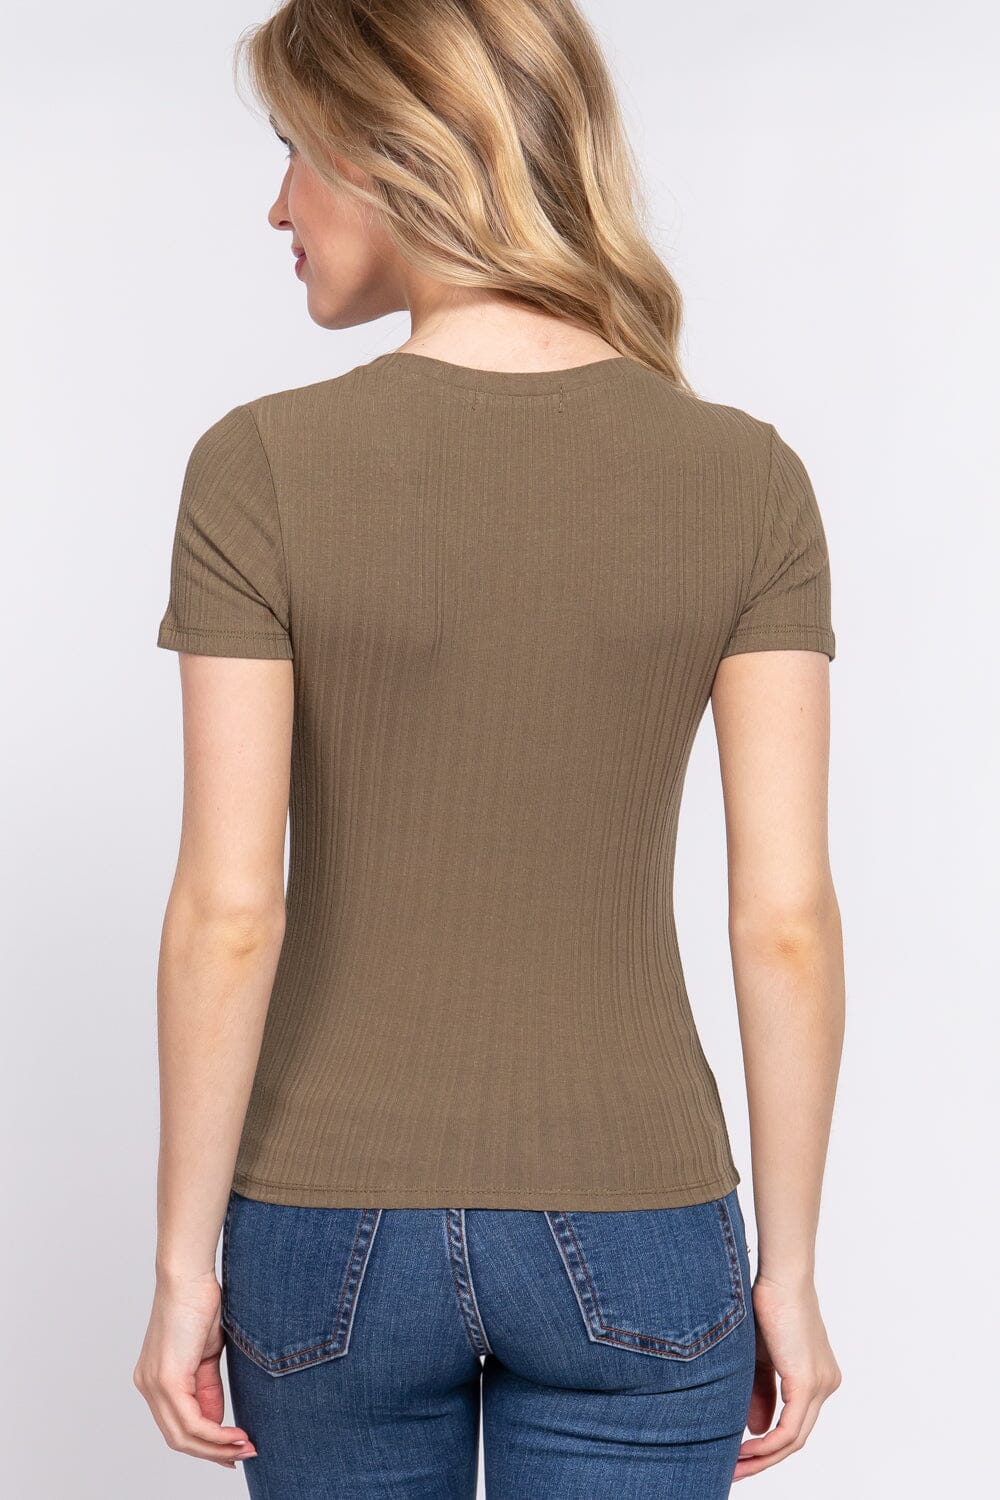 Olive Green Basic Casual Short Sleeve Crew Neck Variegated Rib Knit Top Shirts & Tops jehouze 